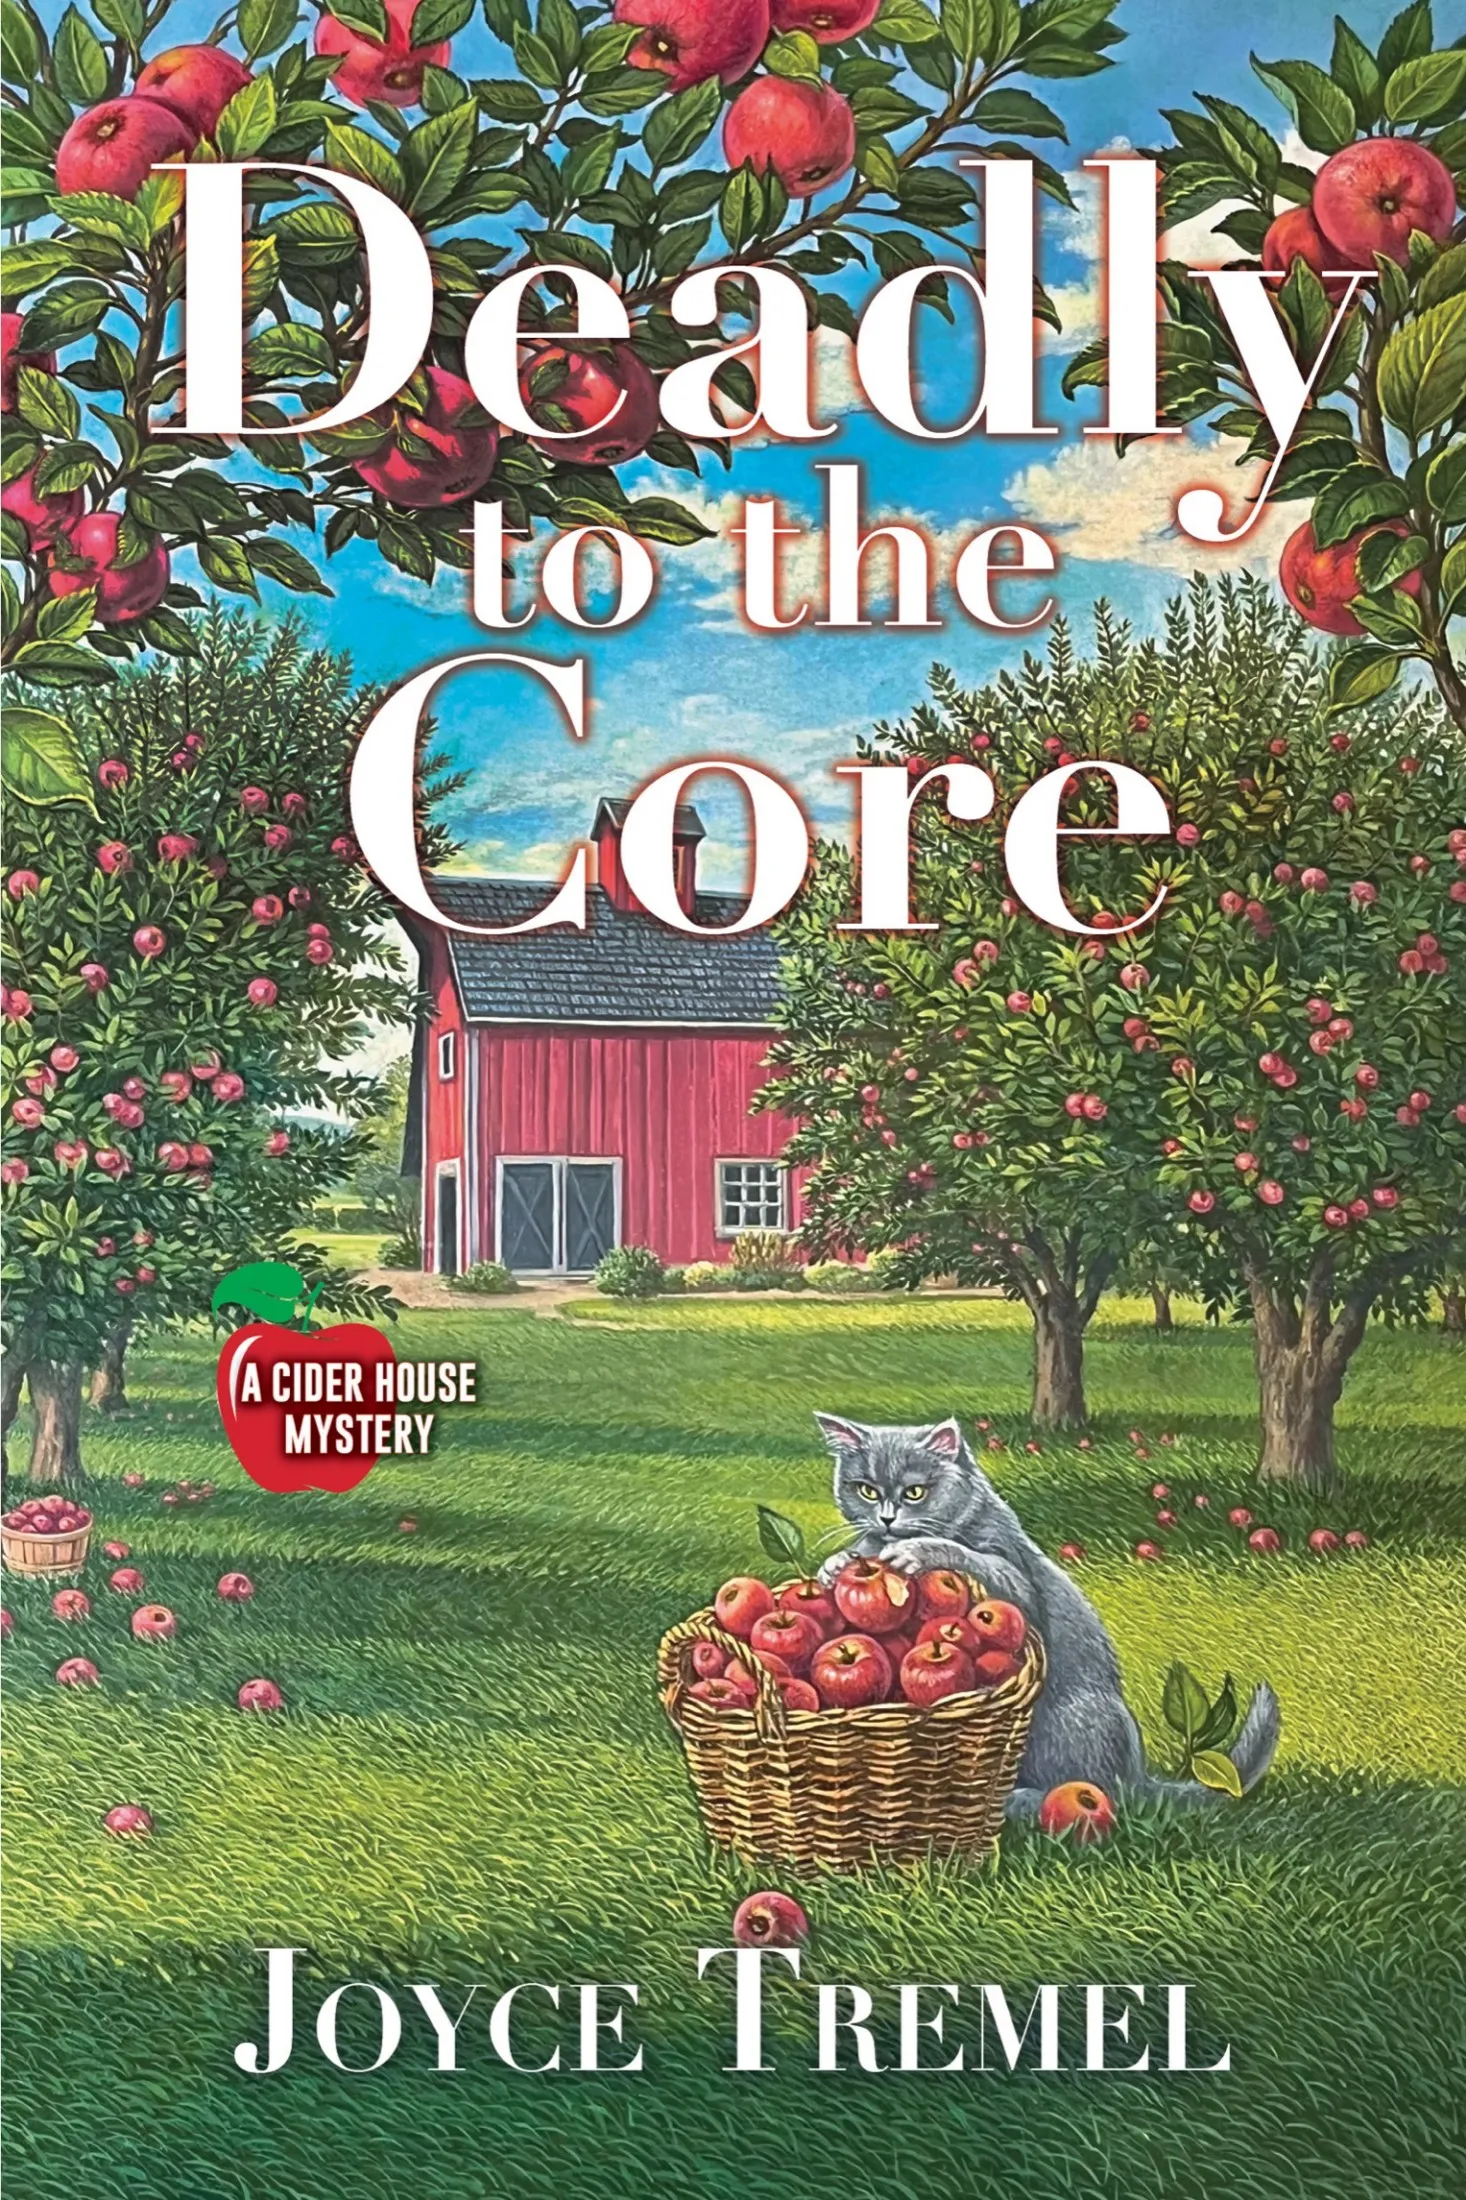 Deadly to the Core (A Cider House Mystery #1)